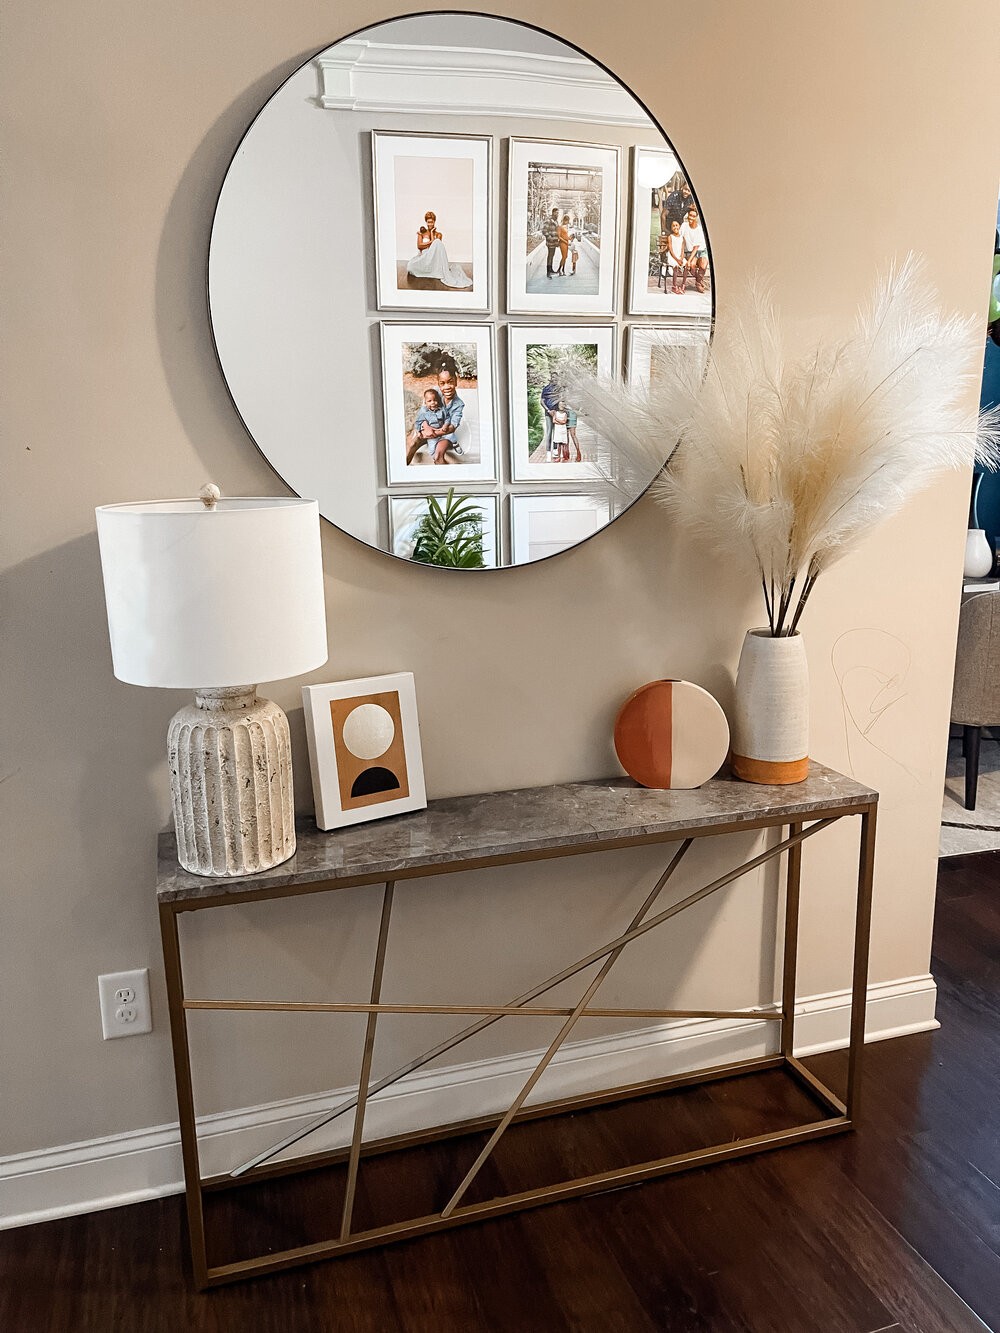 Aria's Bedroom Reveal with Pottery Barn Kids — DAYNA BOLDEN